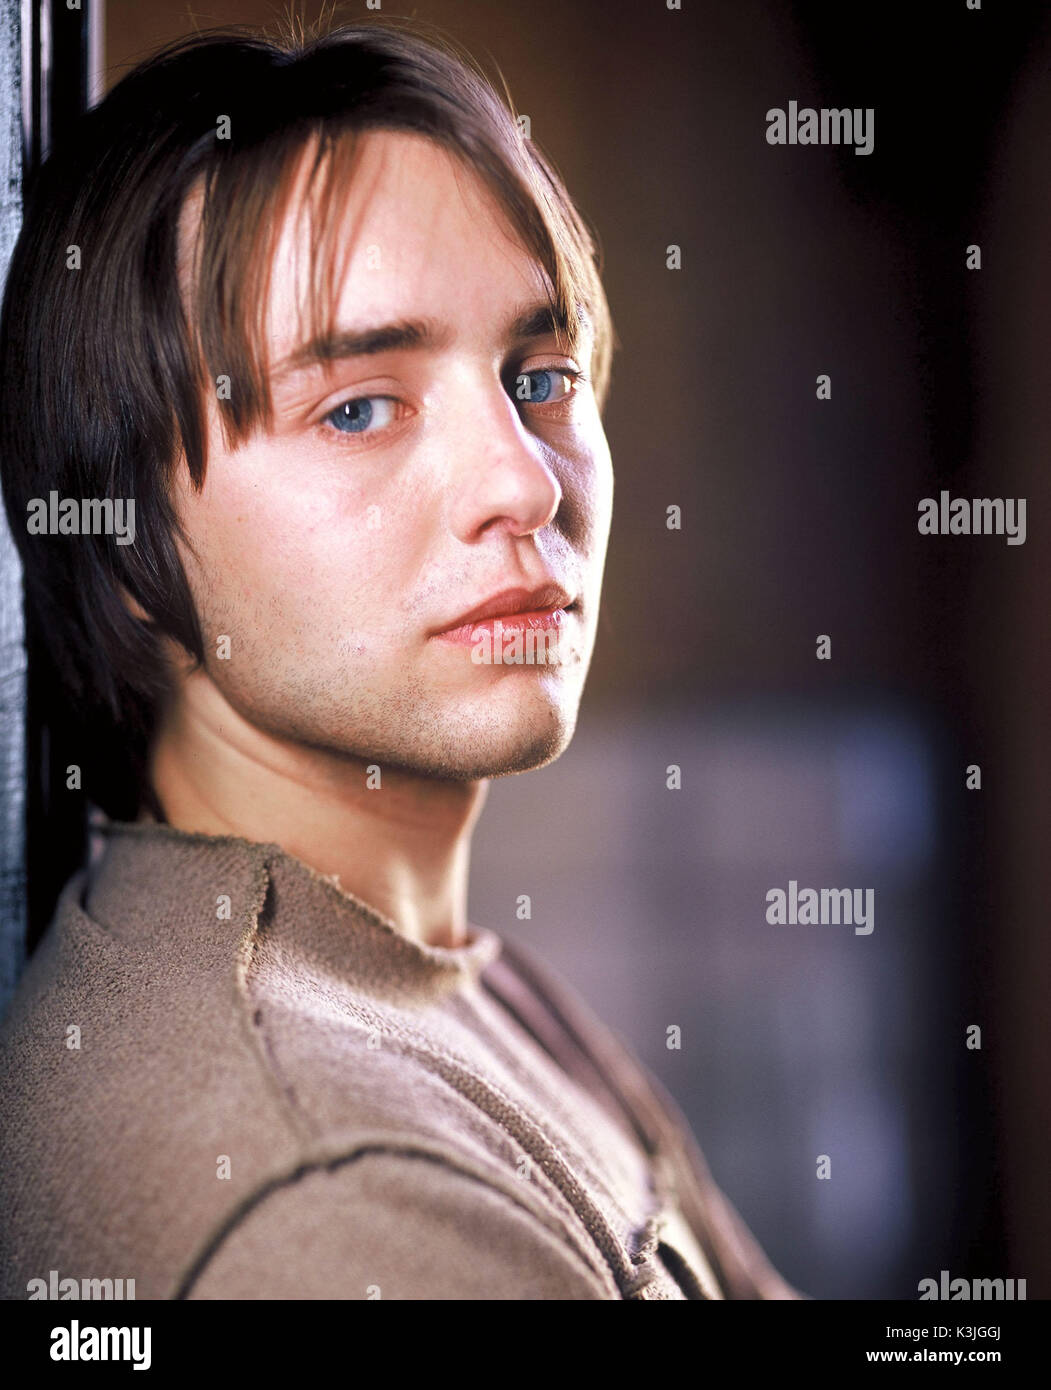 ANGEL Series#5 VINCENT KARTHEISER as Connor ANGEL Stock Photo - Alamy